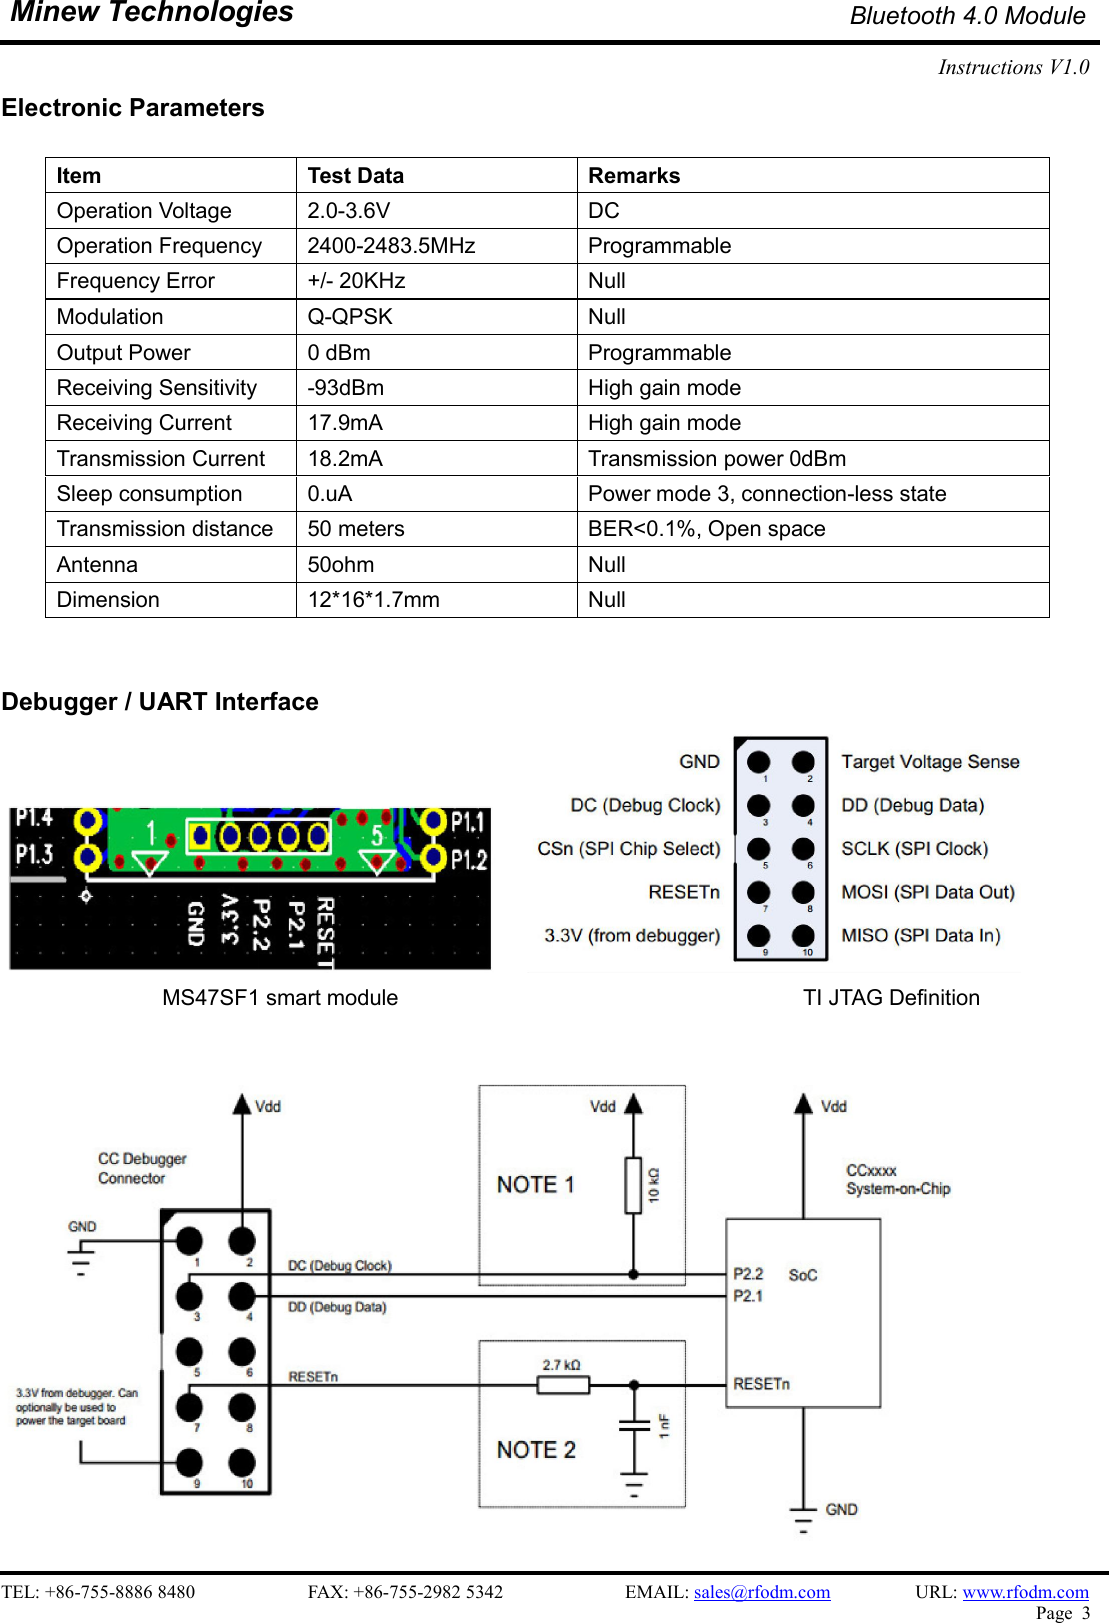    TEL: +86-755-8886 8480                        FAX: +86-755-2982 5342                          EMAIL: sales@rfodm.com                  URL: www.rfodm.com   Page  3  Minew Technologies Bluetooth 4.0 Module Instructions V1.0    Electronic Parameters  Item    Test Data  Remarks Operation Voltage  2.0-3.6V  DC Operation Frequency  2400-2483.5MHz  Programmable Frequency Error  +/- 20KHz  Null Modulation  Q-QPSK  Null Output Power  0 dBm  Programmable Receiving Sensitivity  -93dBm  High gain mode Receiving Current  17.9mA  High gain mode Transmission Current  18.2mA  Transmission power 0dBm Sleep consumption  0.uA  Power mode 3, connection-less state Transmission distance  50 meters  BER&lt;0.1%, Open space Antenna  50ohm  Null Dimension  12*16*1.7mm  Null   Debugger / UART Interface                    MS47SF1 smart module                                                                          TI JTAG Definition                                                